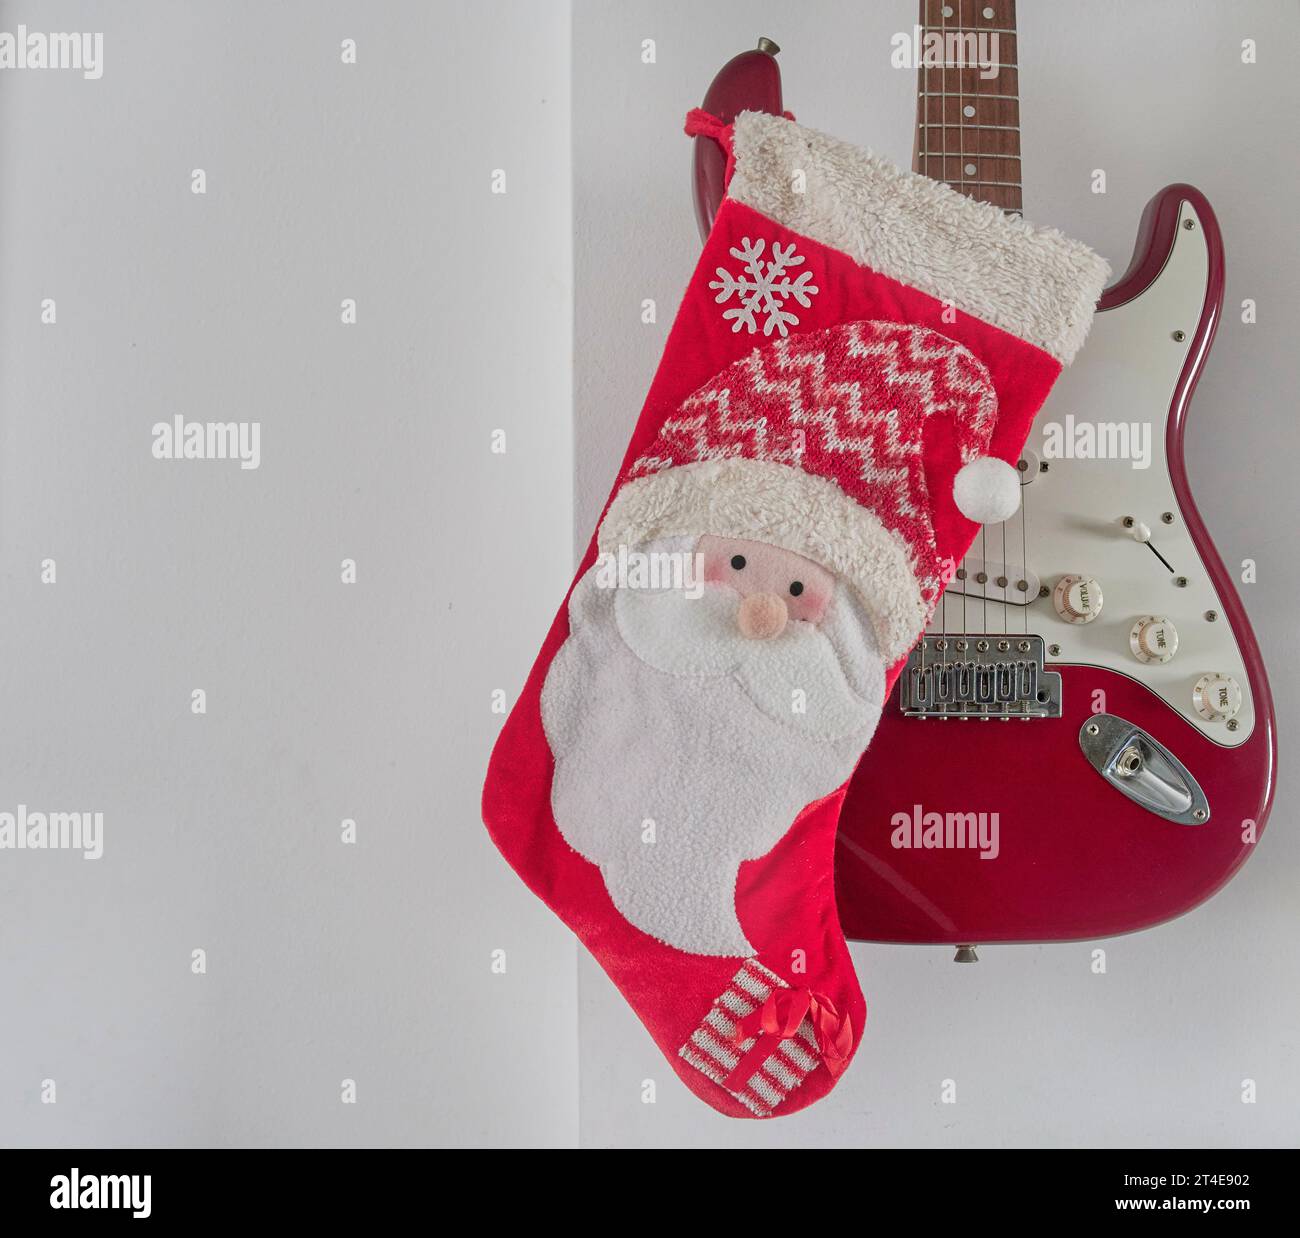 Christmas decoration, red santa sock hanging from a red electric guitar on a white wall. Christmas concept. Copy space. Horizontal Stock Photo